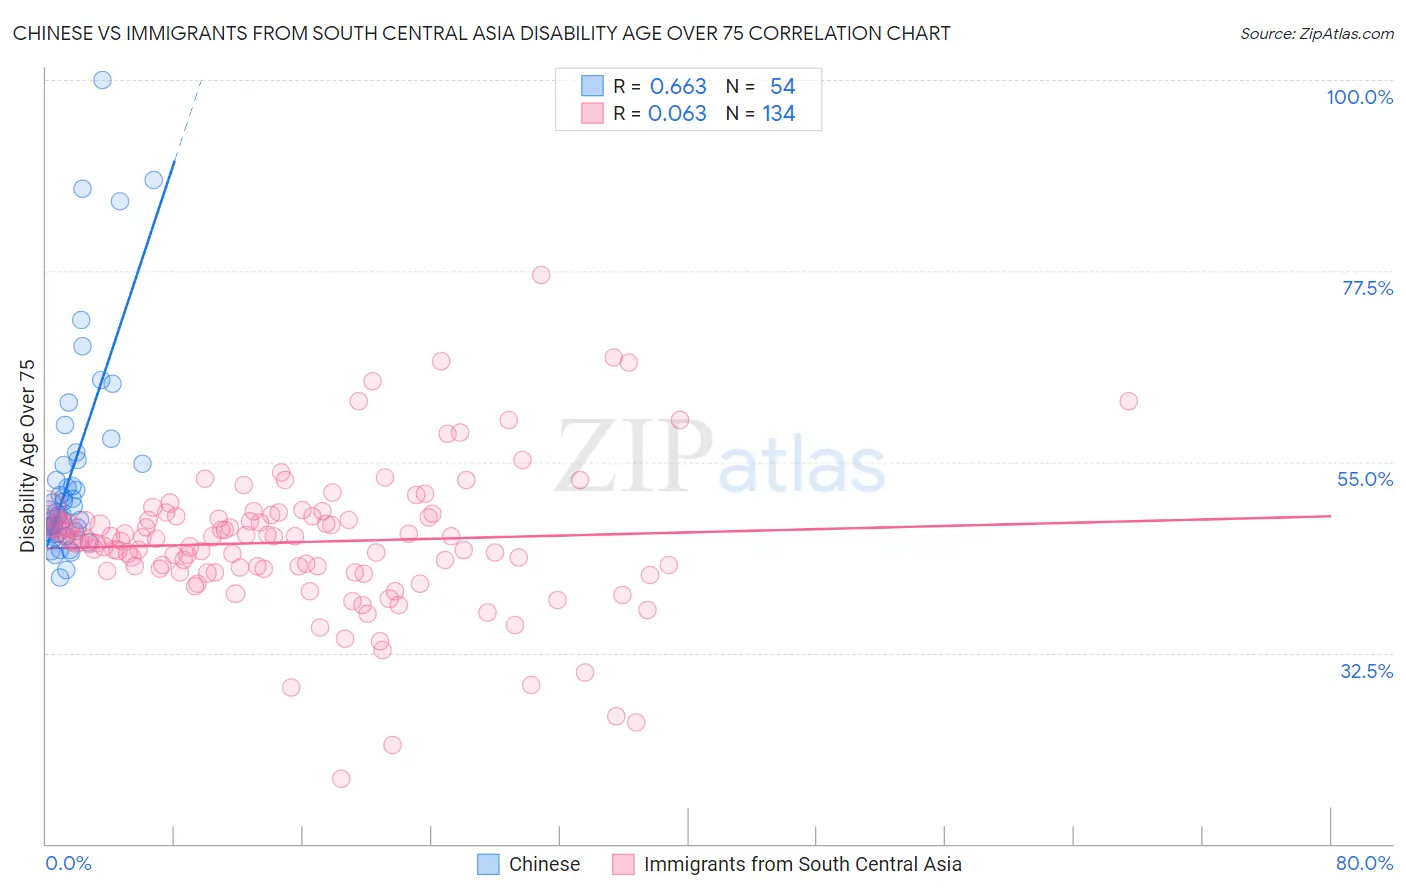 Chinese vs Immigrants from South Central Asia Disability Age Over 75